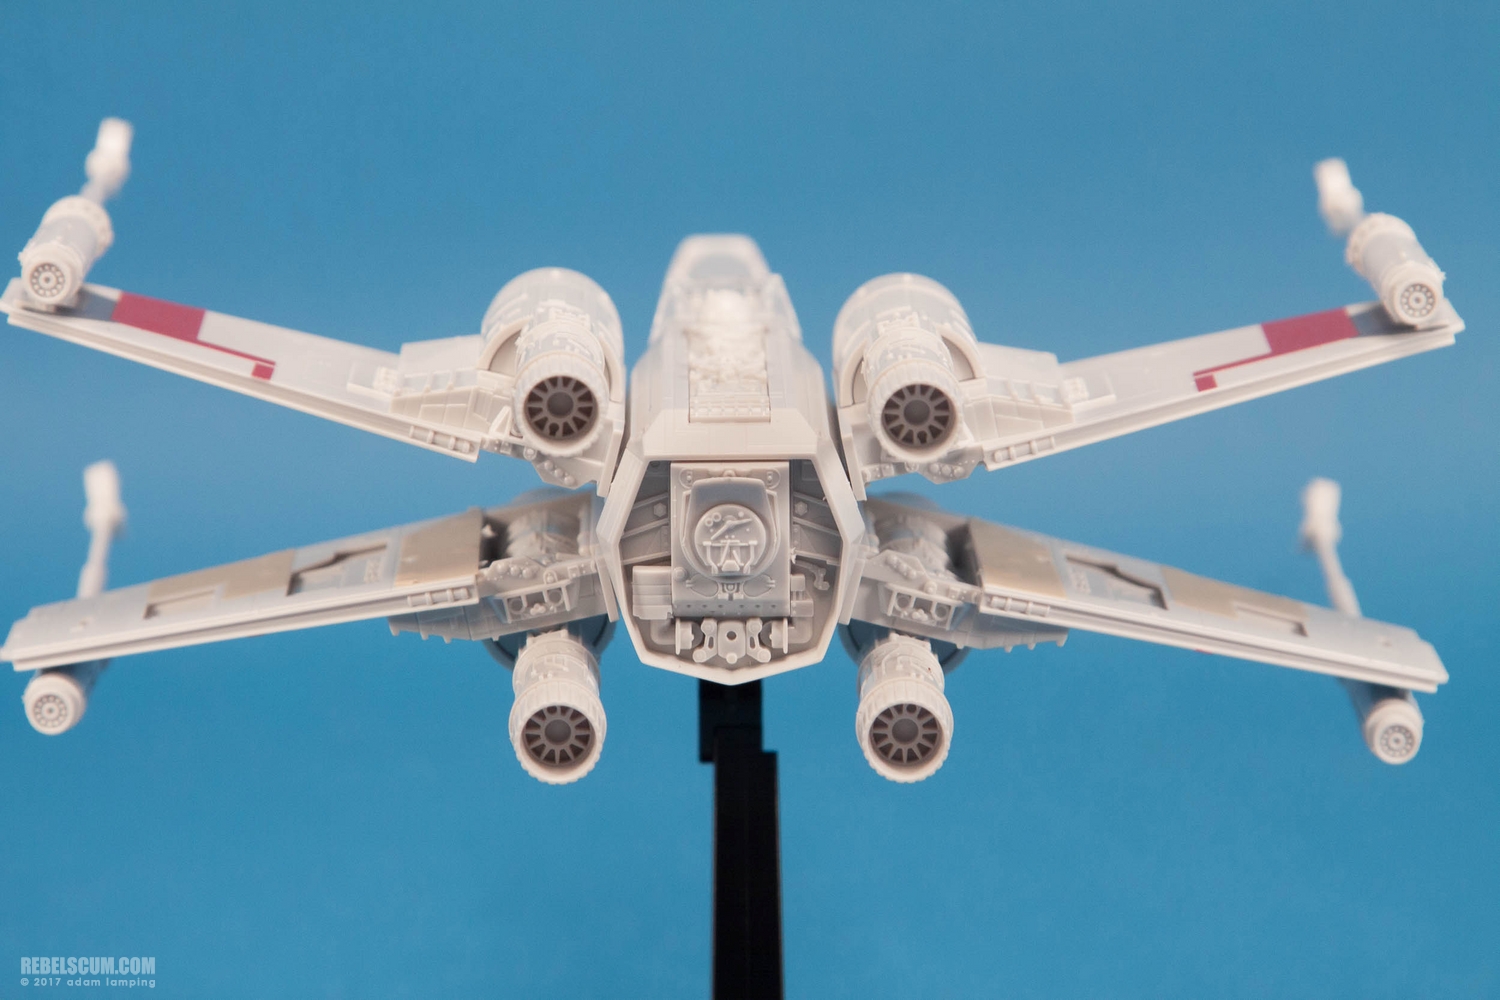 bandai-red-squadron-x-wing-starfighter-scale-model-kit-008.jpg